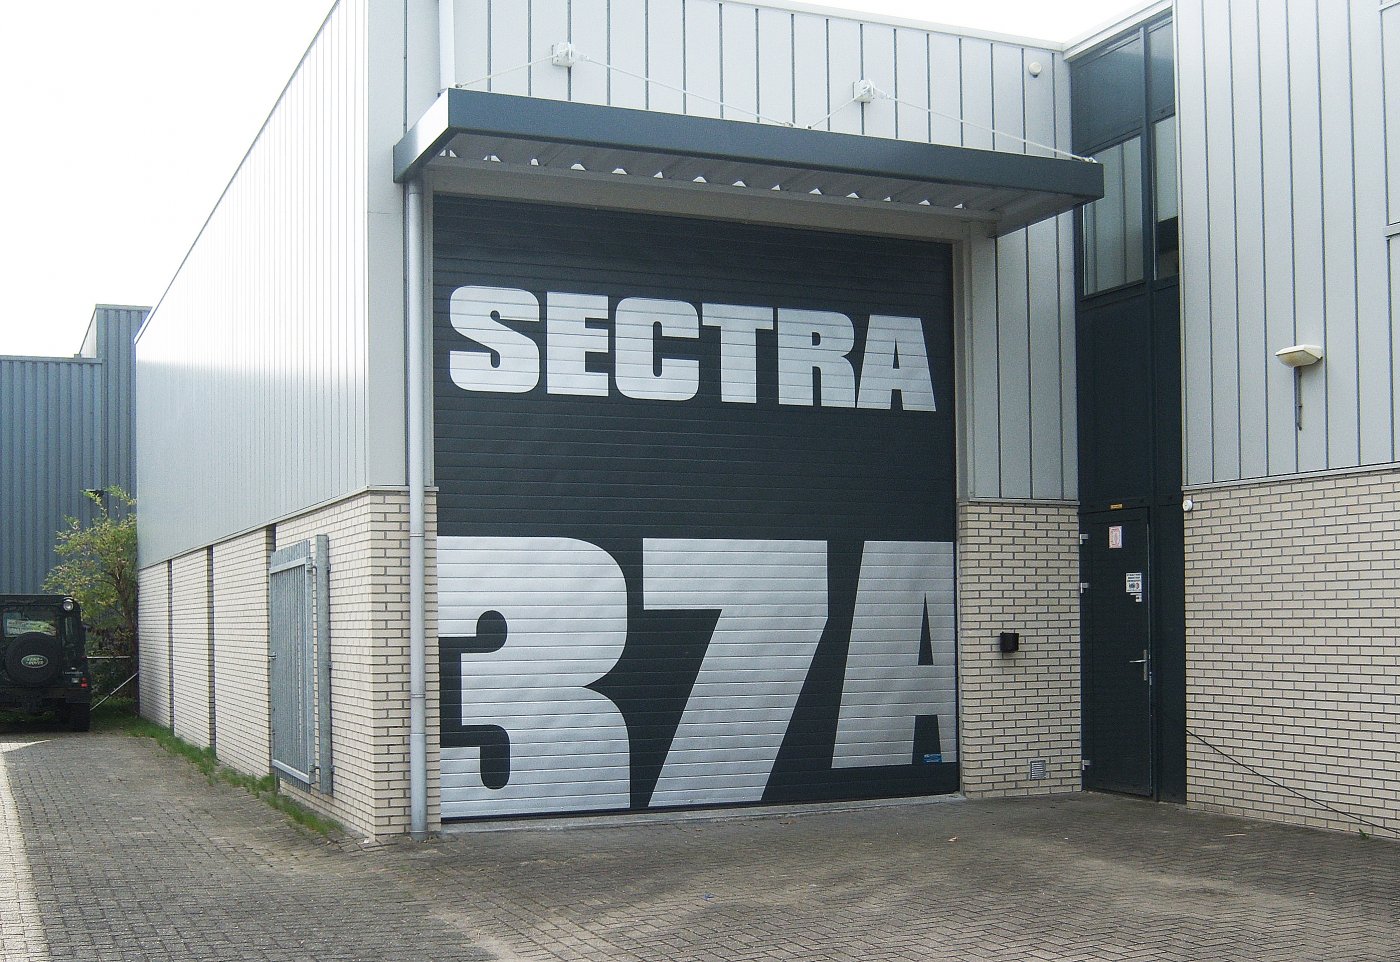 sectra